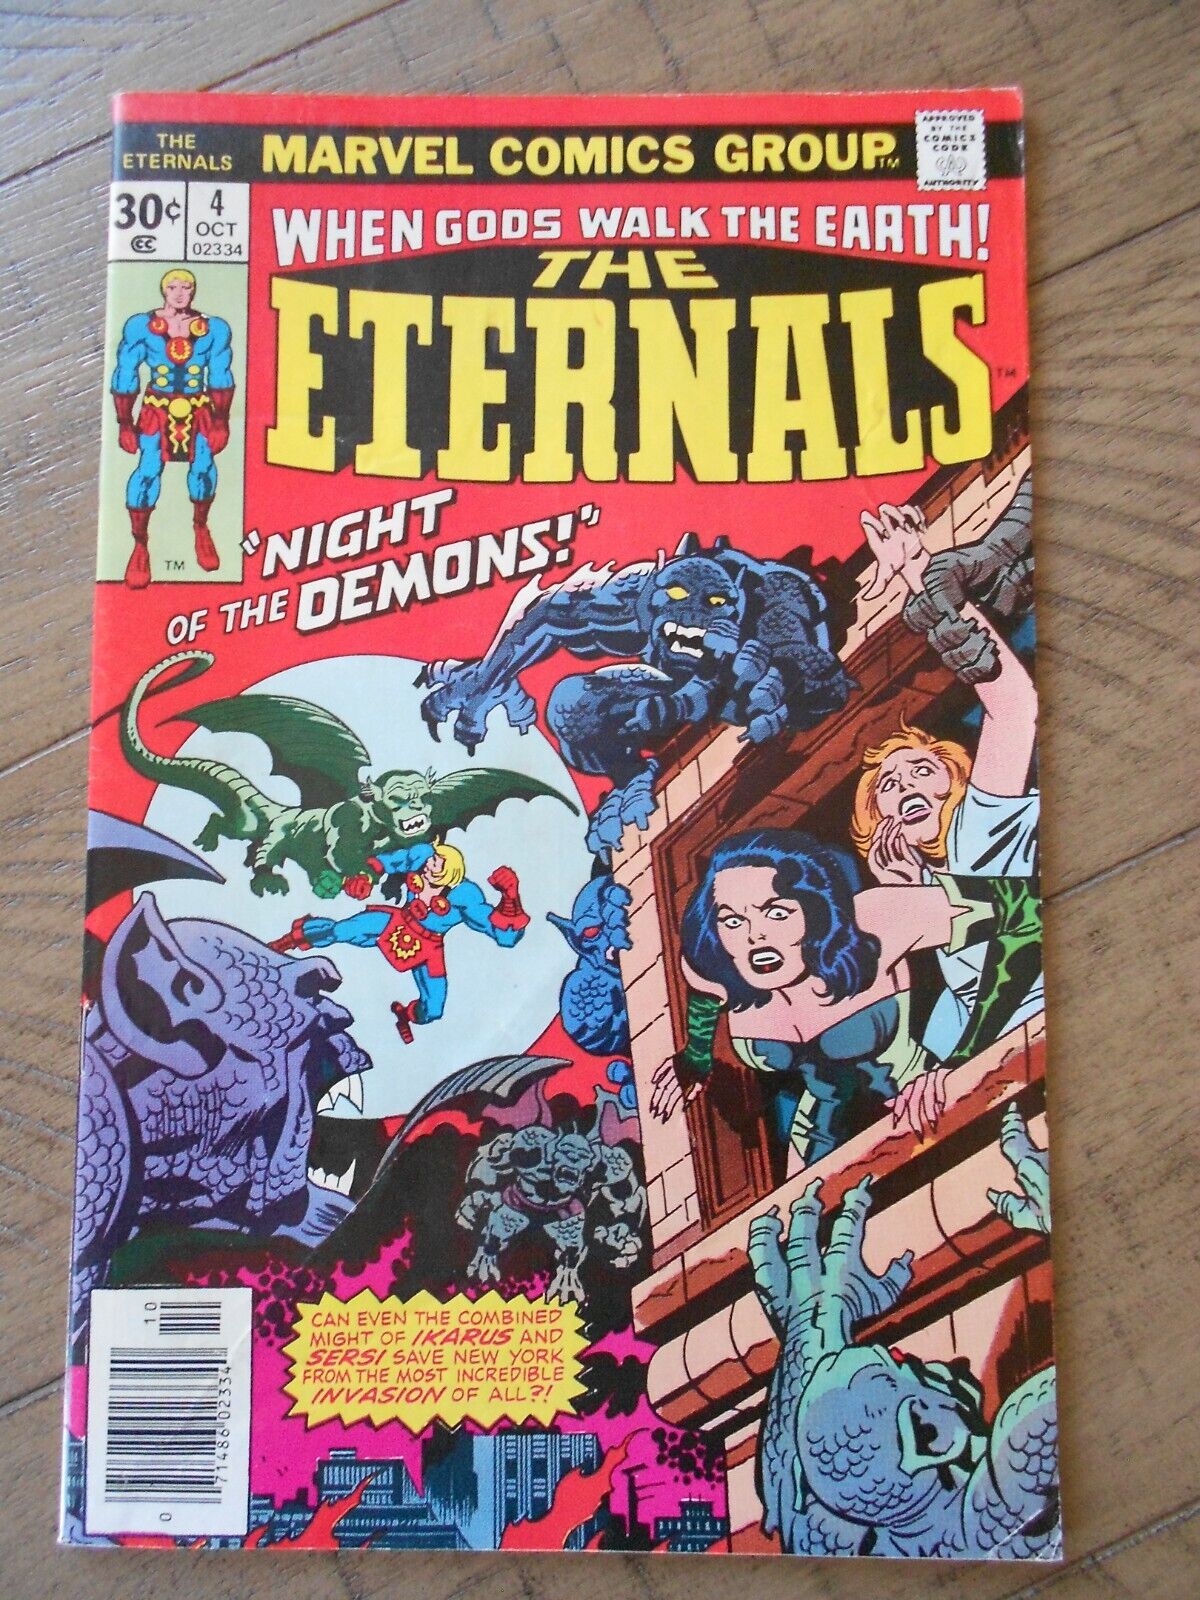 THE ETERNALS #4 Marvel Comics 1976 Jack Kirby When Gods Walk The Earth FN/VF